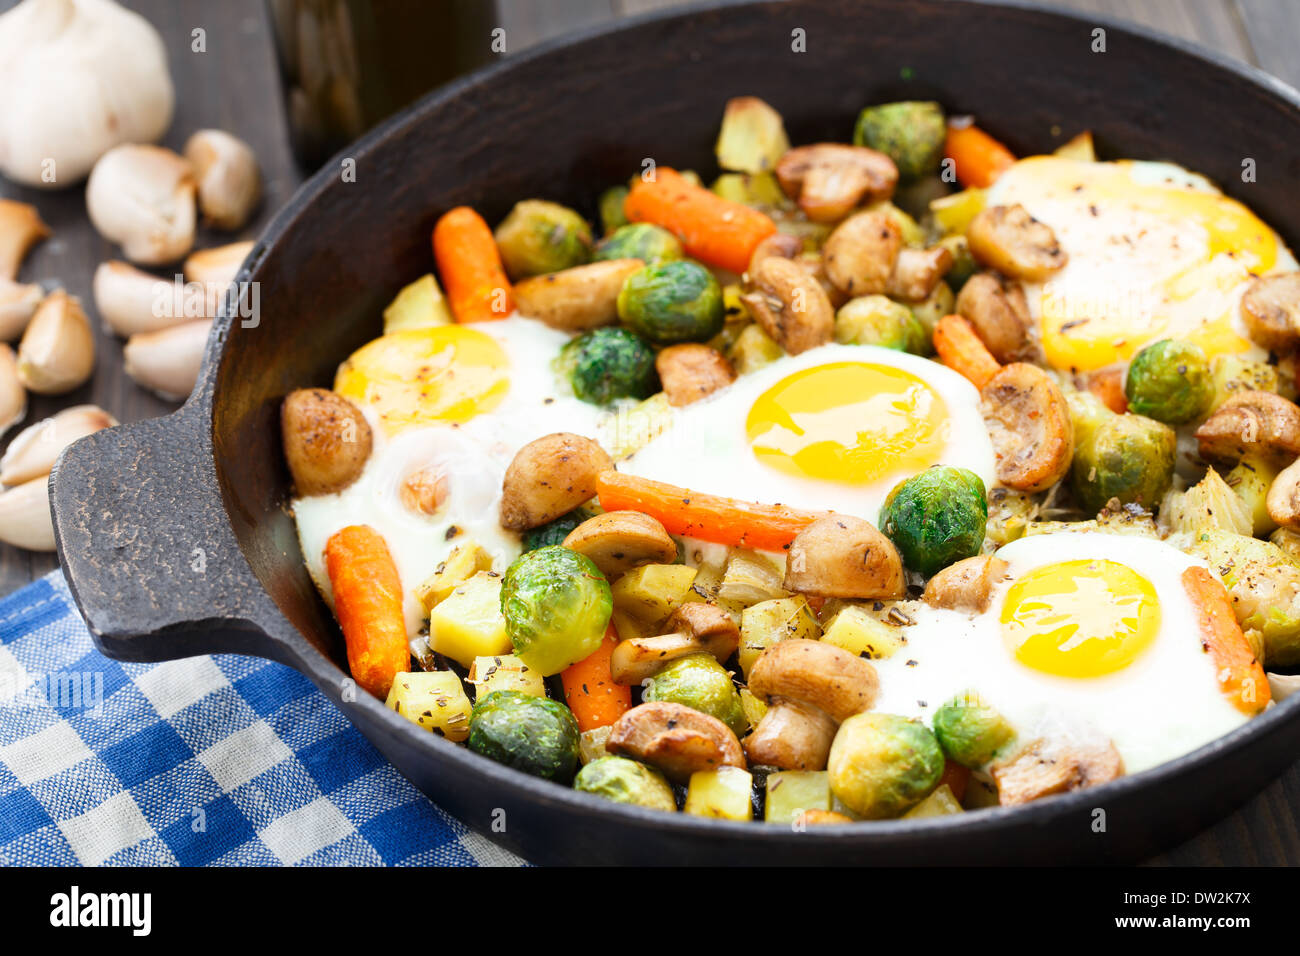 Baked eggs with vegetables and mushrooms Stock Photo